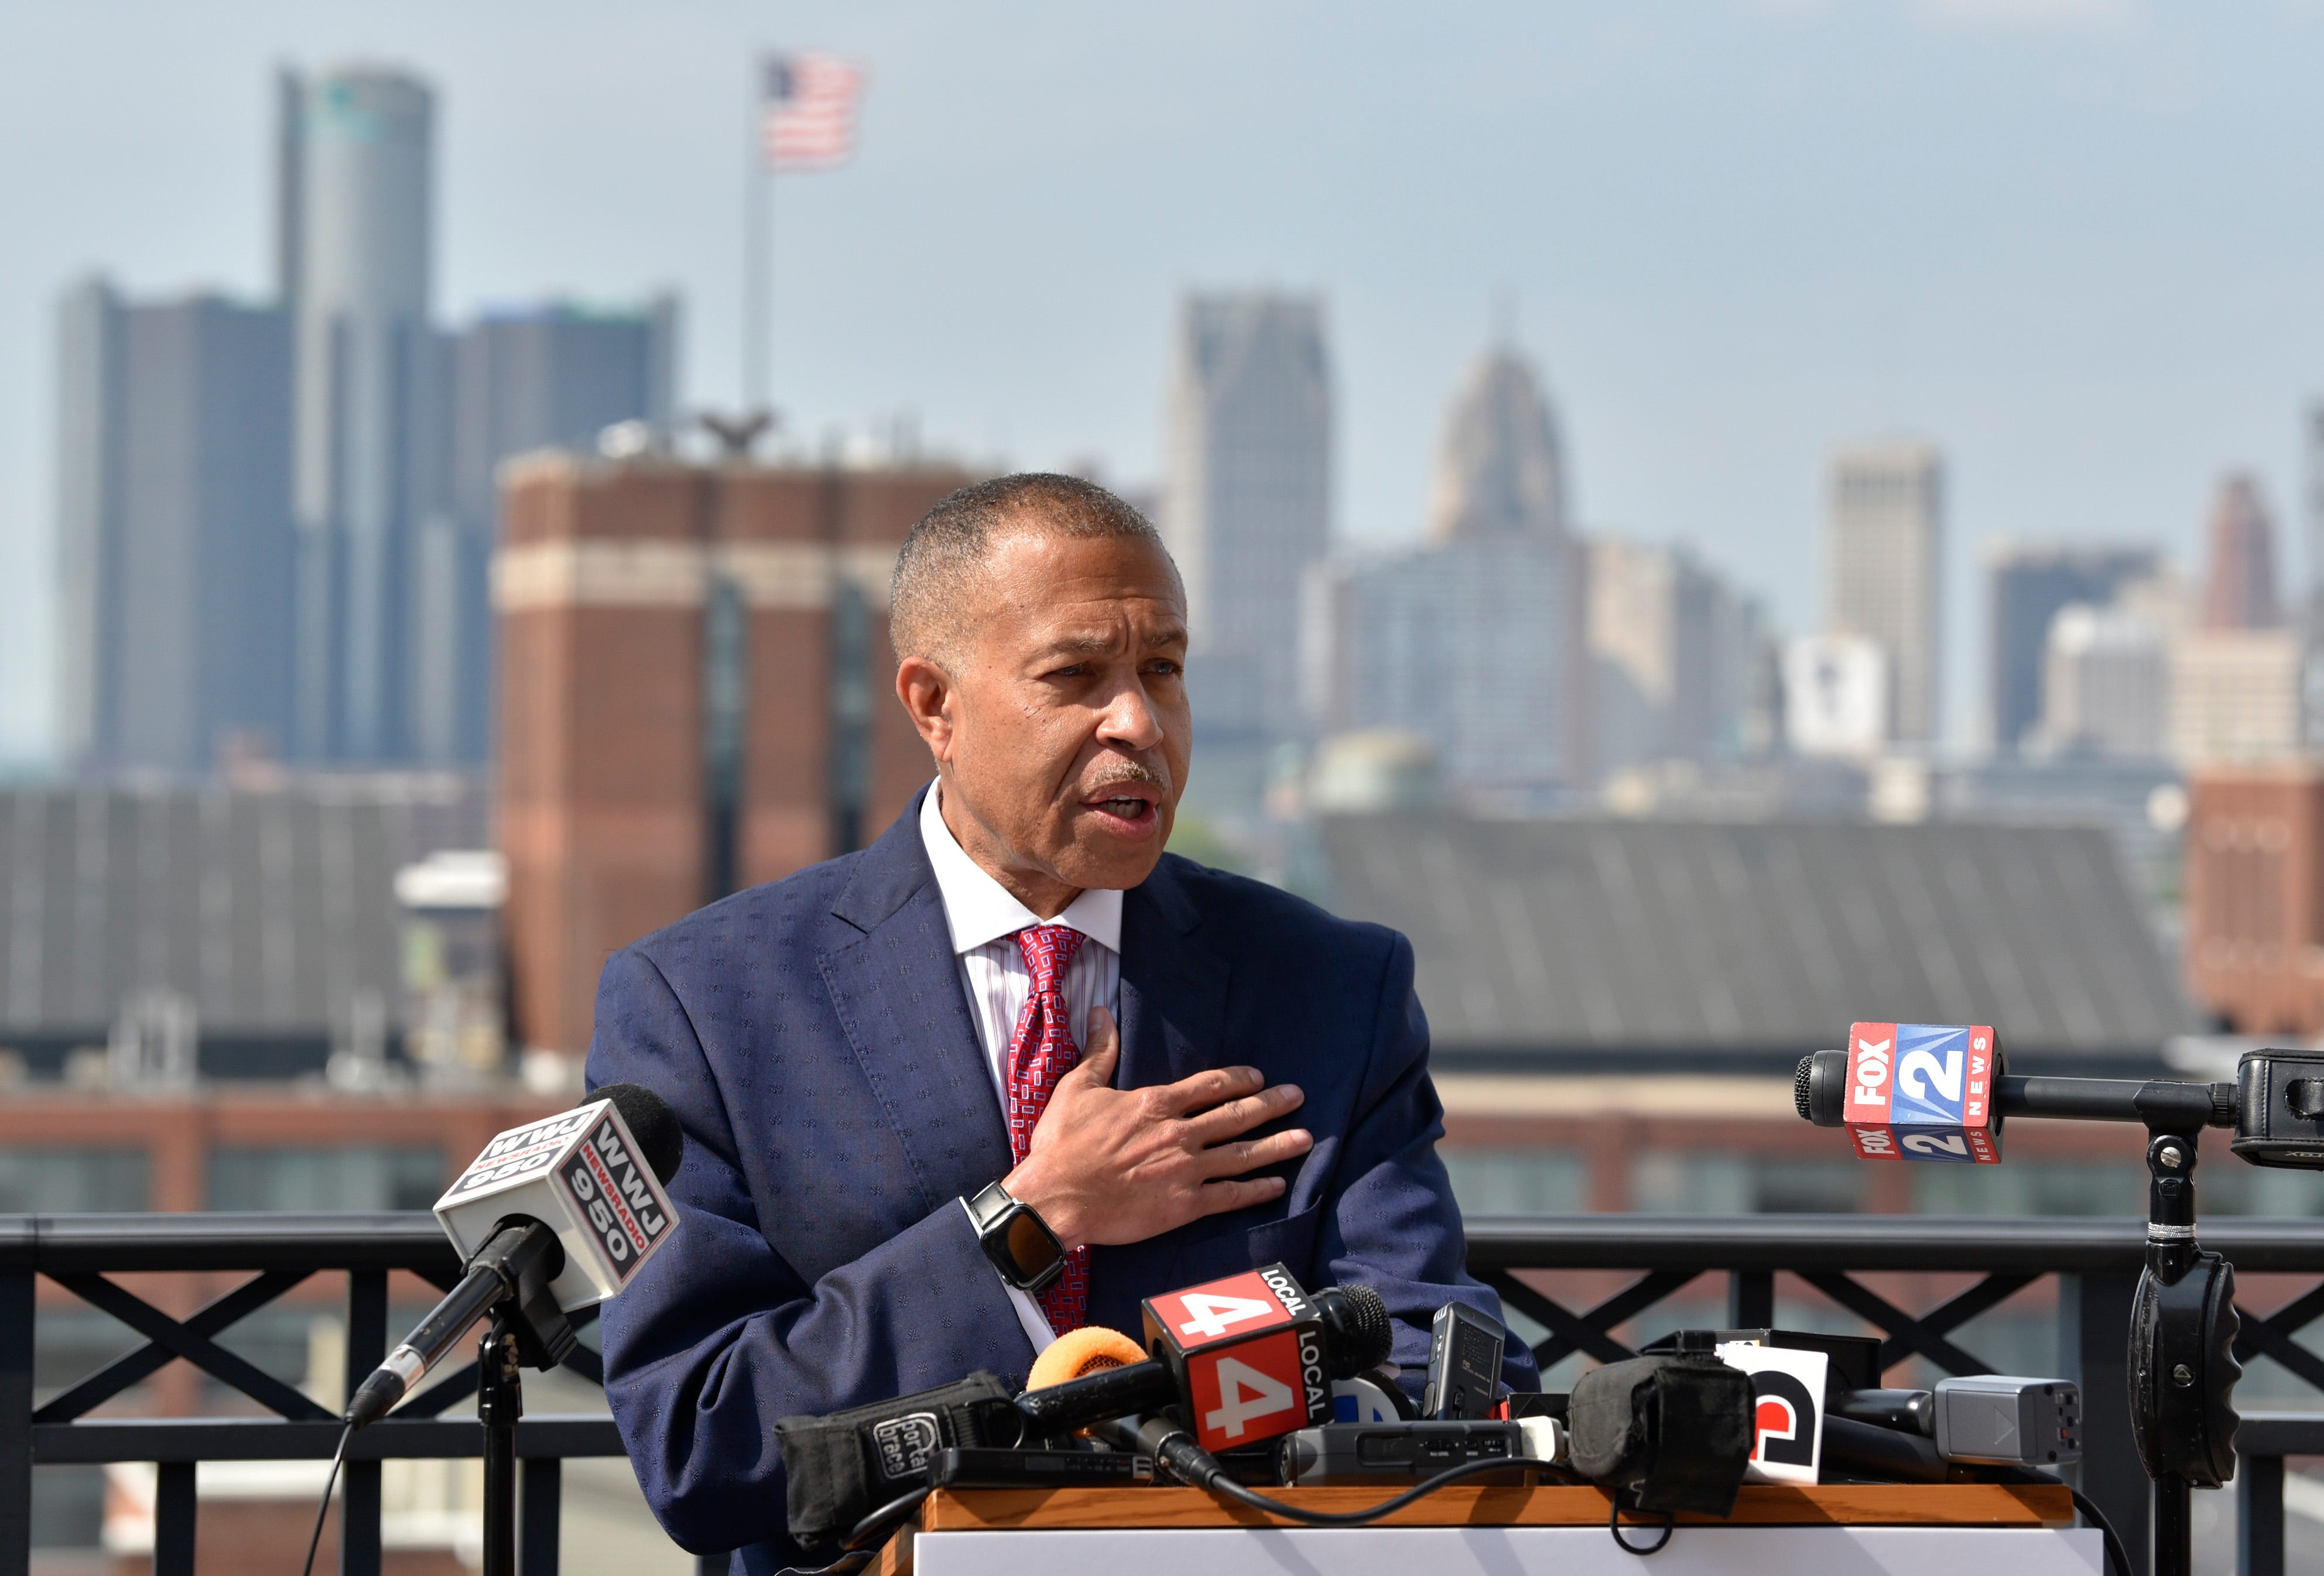 Former Detroit Police Chief James Craig invites supporters and the media in the Pledge of Allegiance as he stands in front of the Detroit skyline before announcing his Republican candidacy for Michigan governor, Tuesday afternoon, September 14 ,2021.